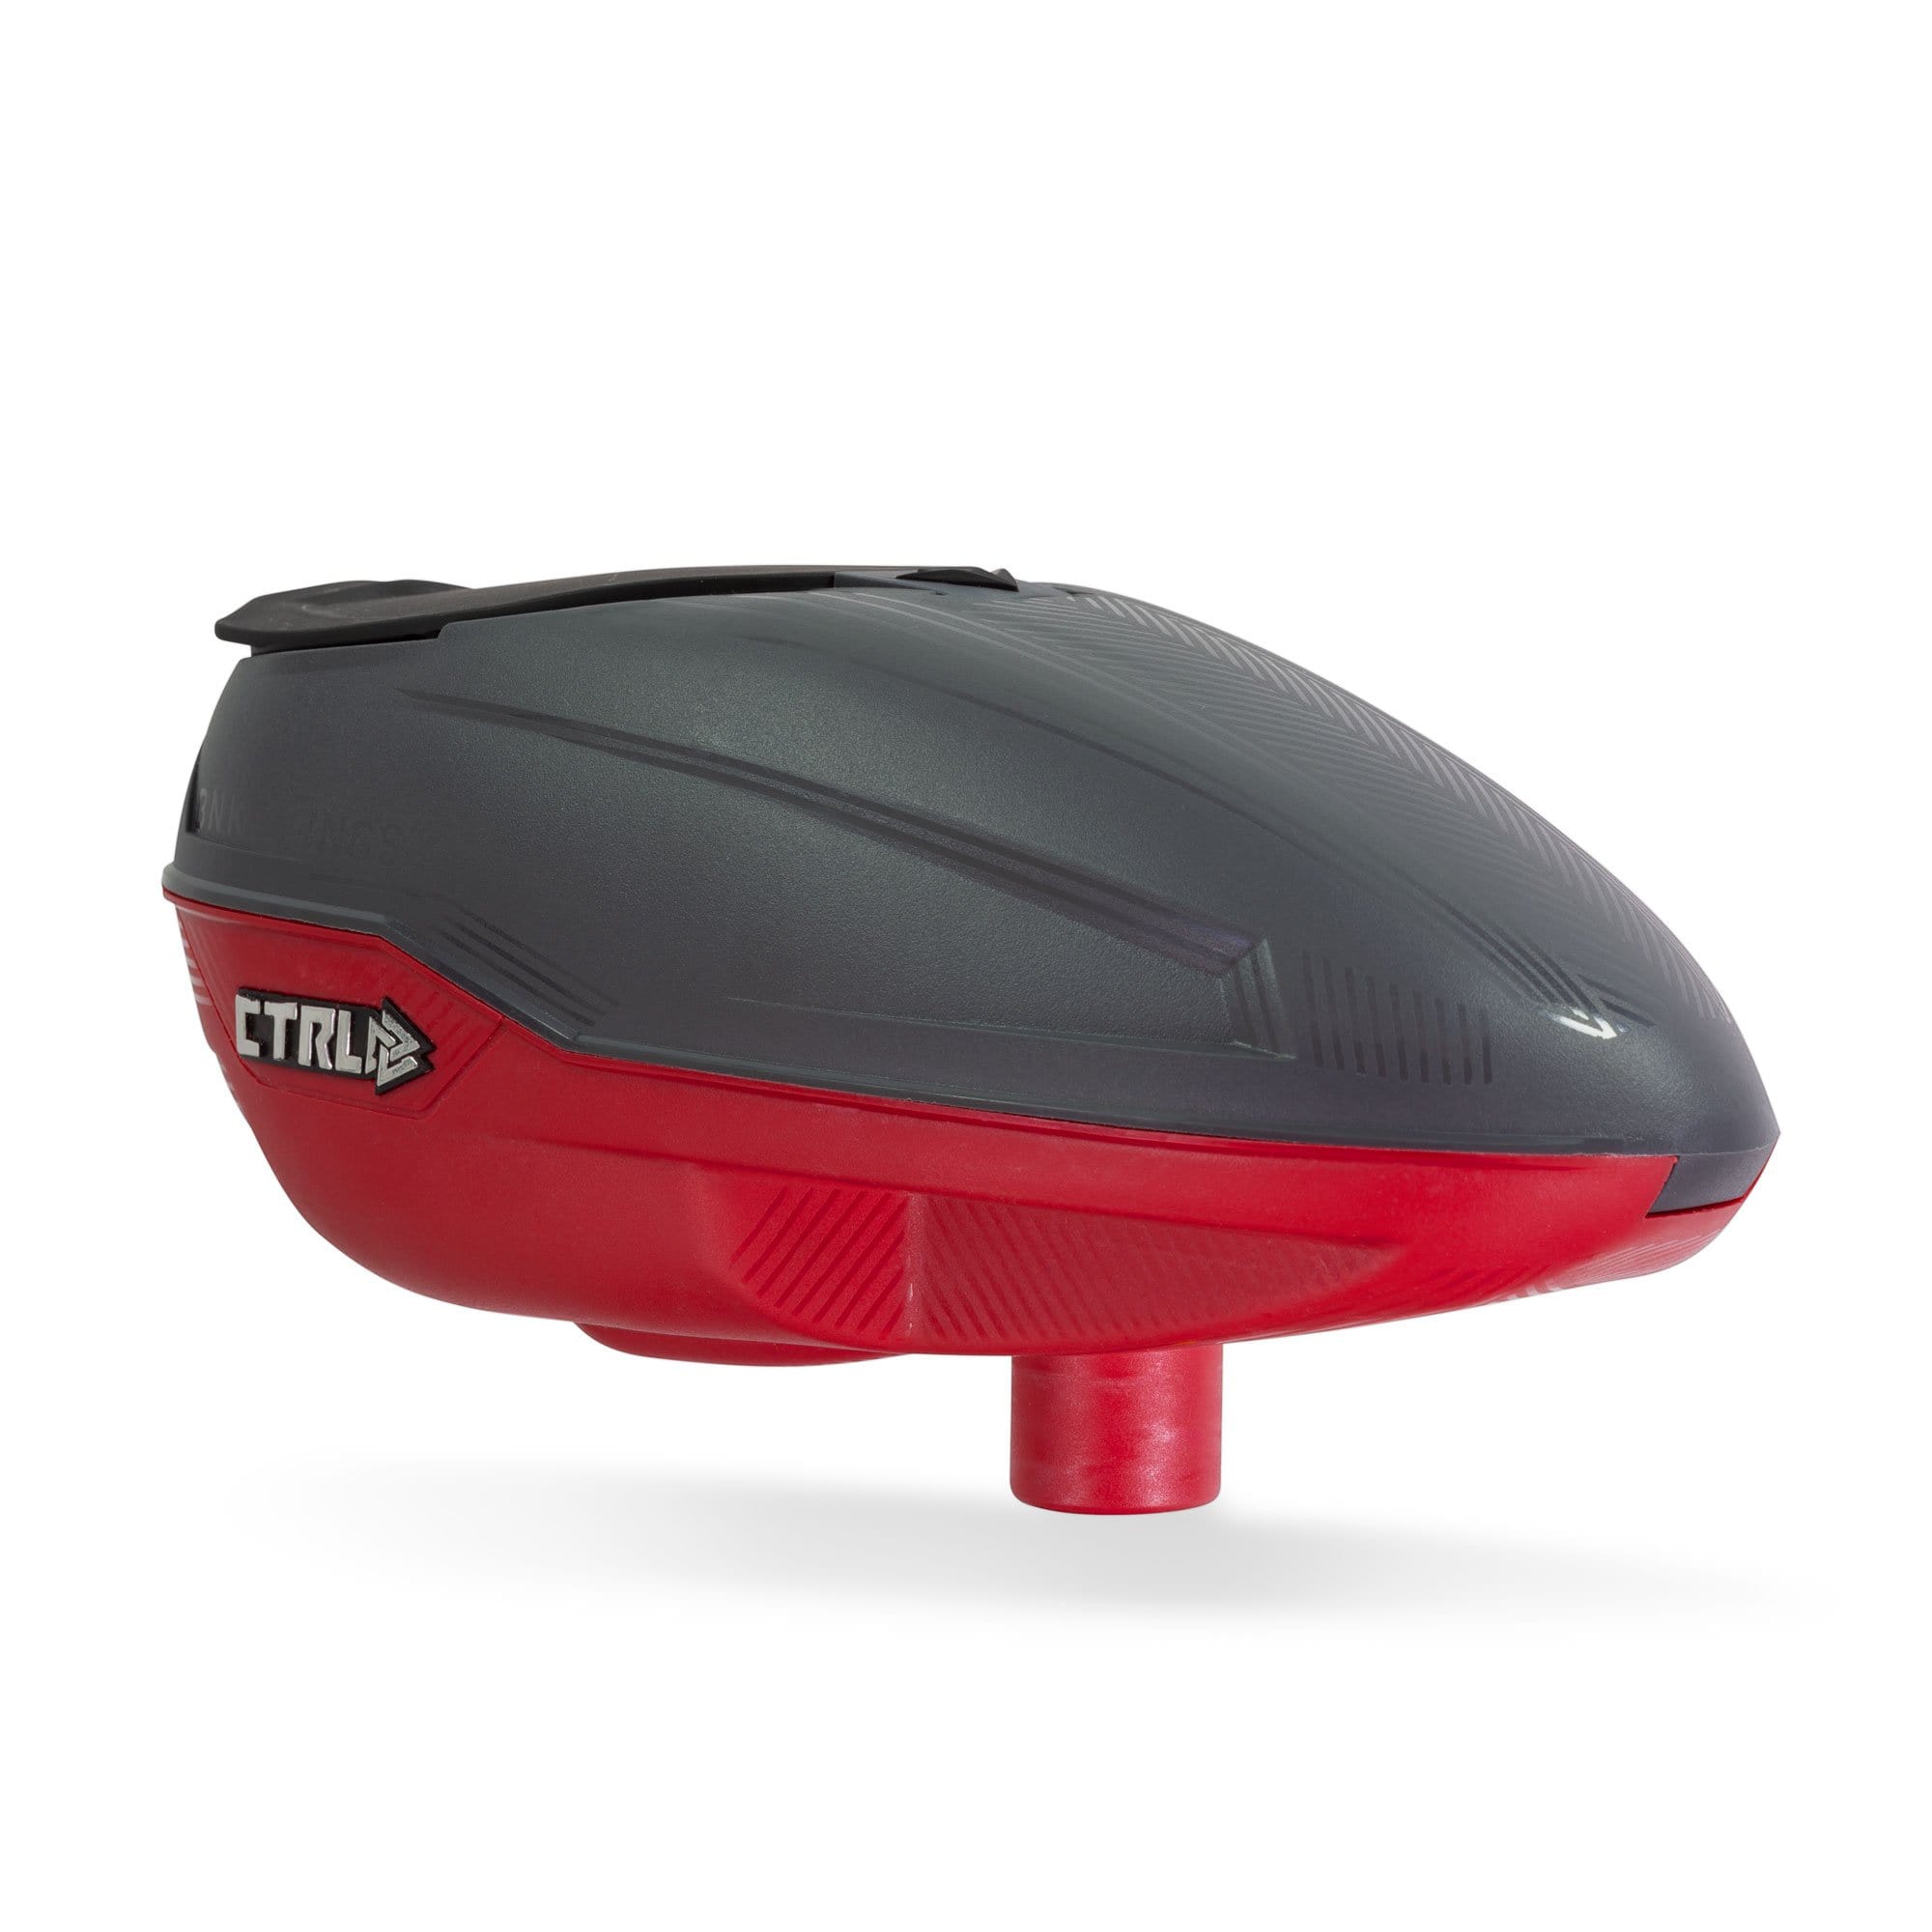 Bunkerkings CTRL Loader - Graphic Red - Eminent Paintball And Airsoft